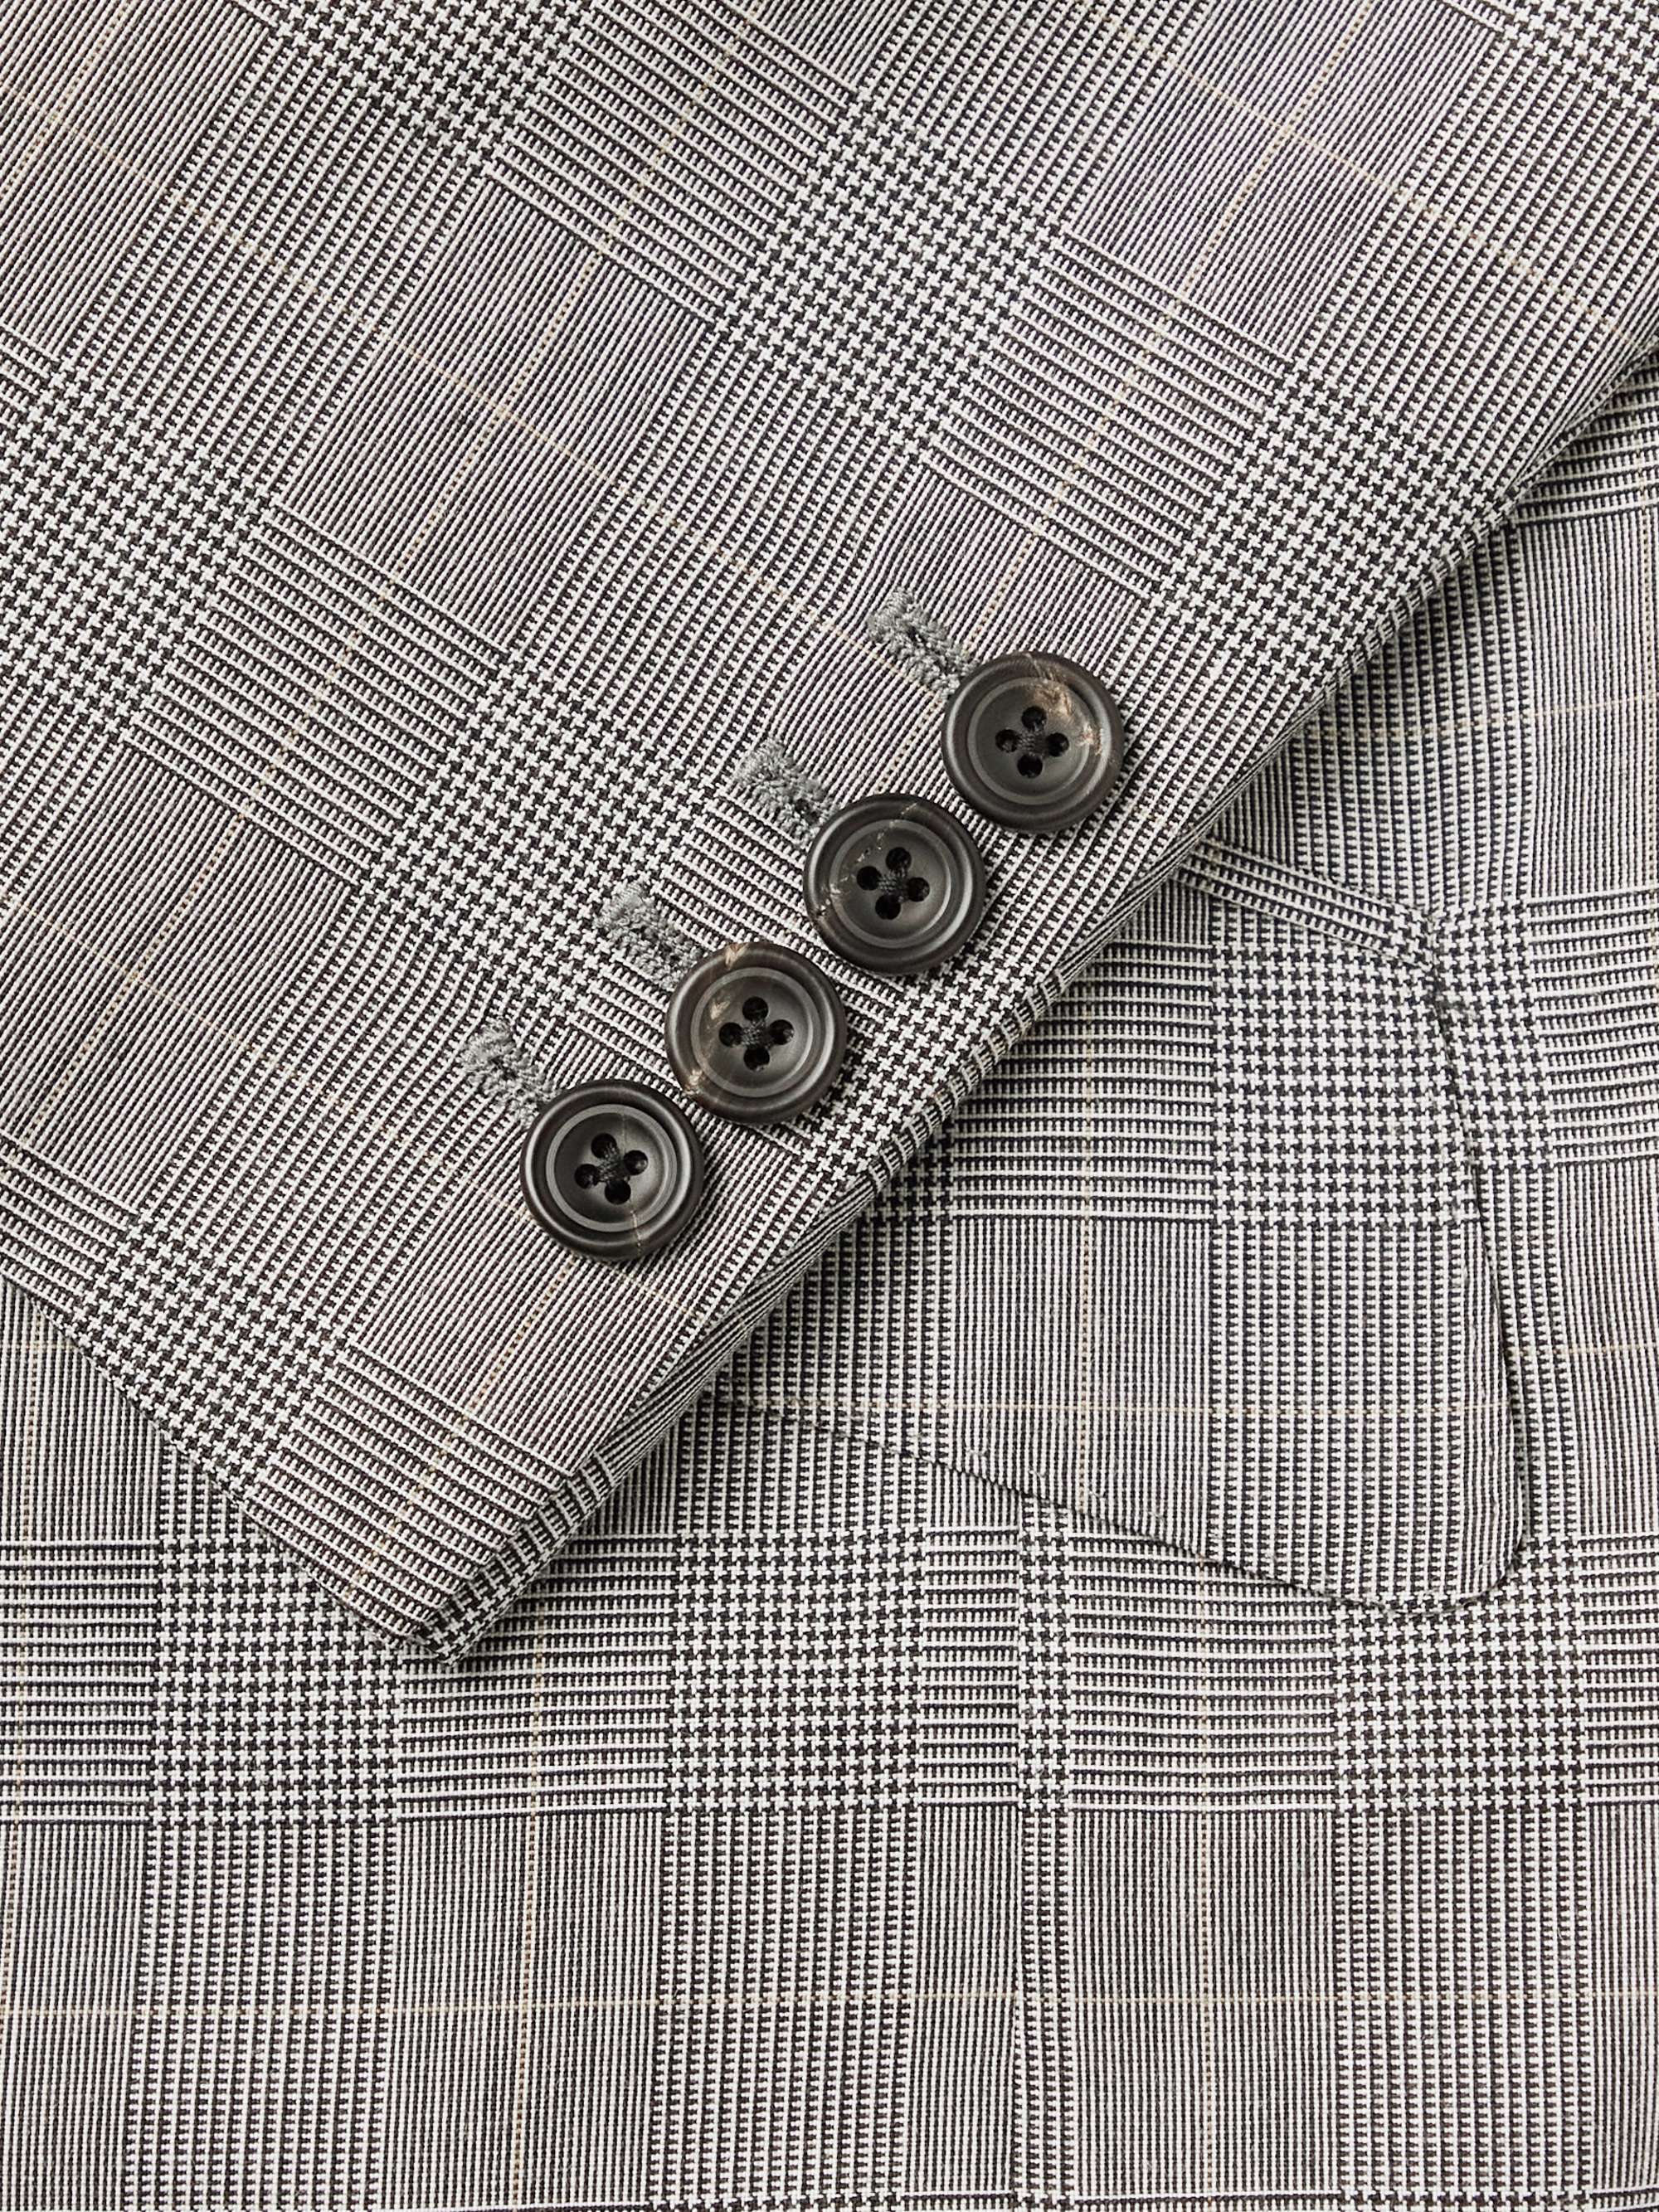 KINGSMAN Double-Breasted Prince of Wales Checked Wool Blazer